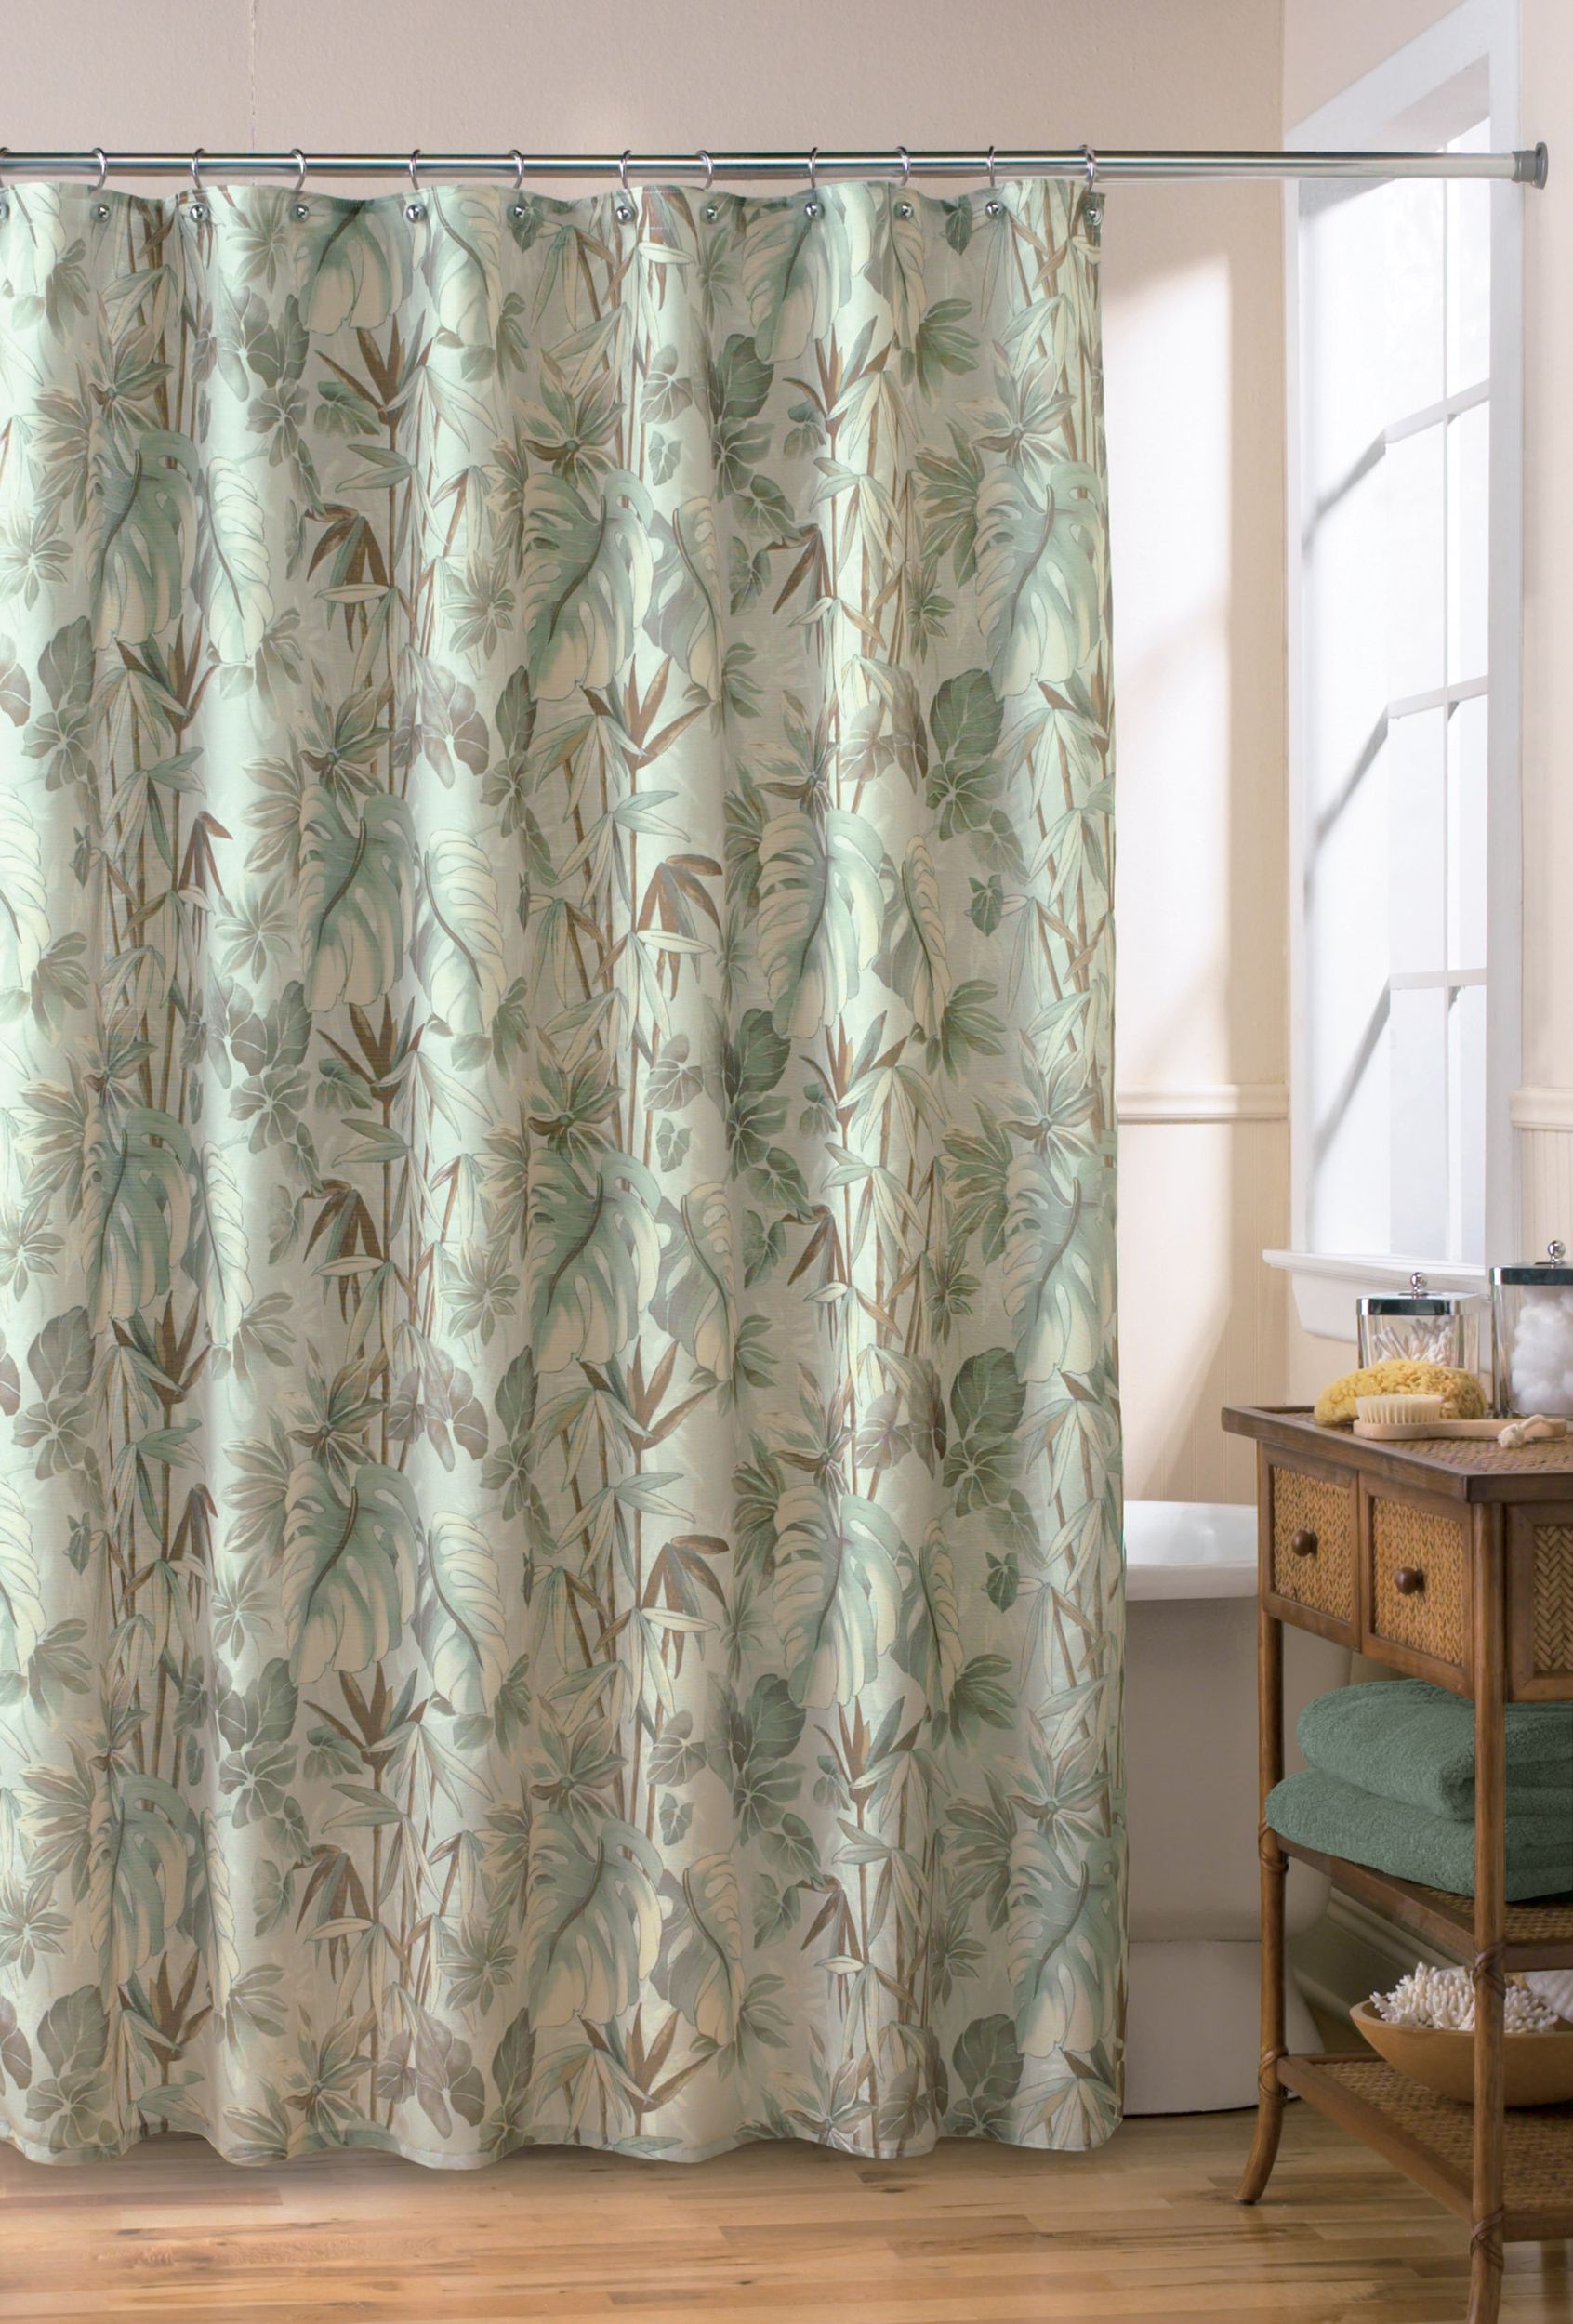 Whole Home Shower Curtain Frond Fabric